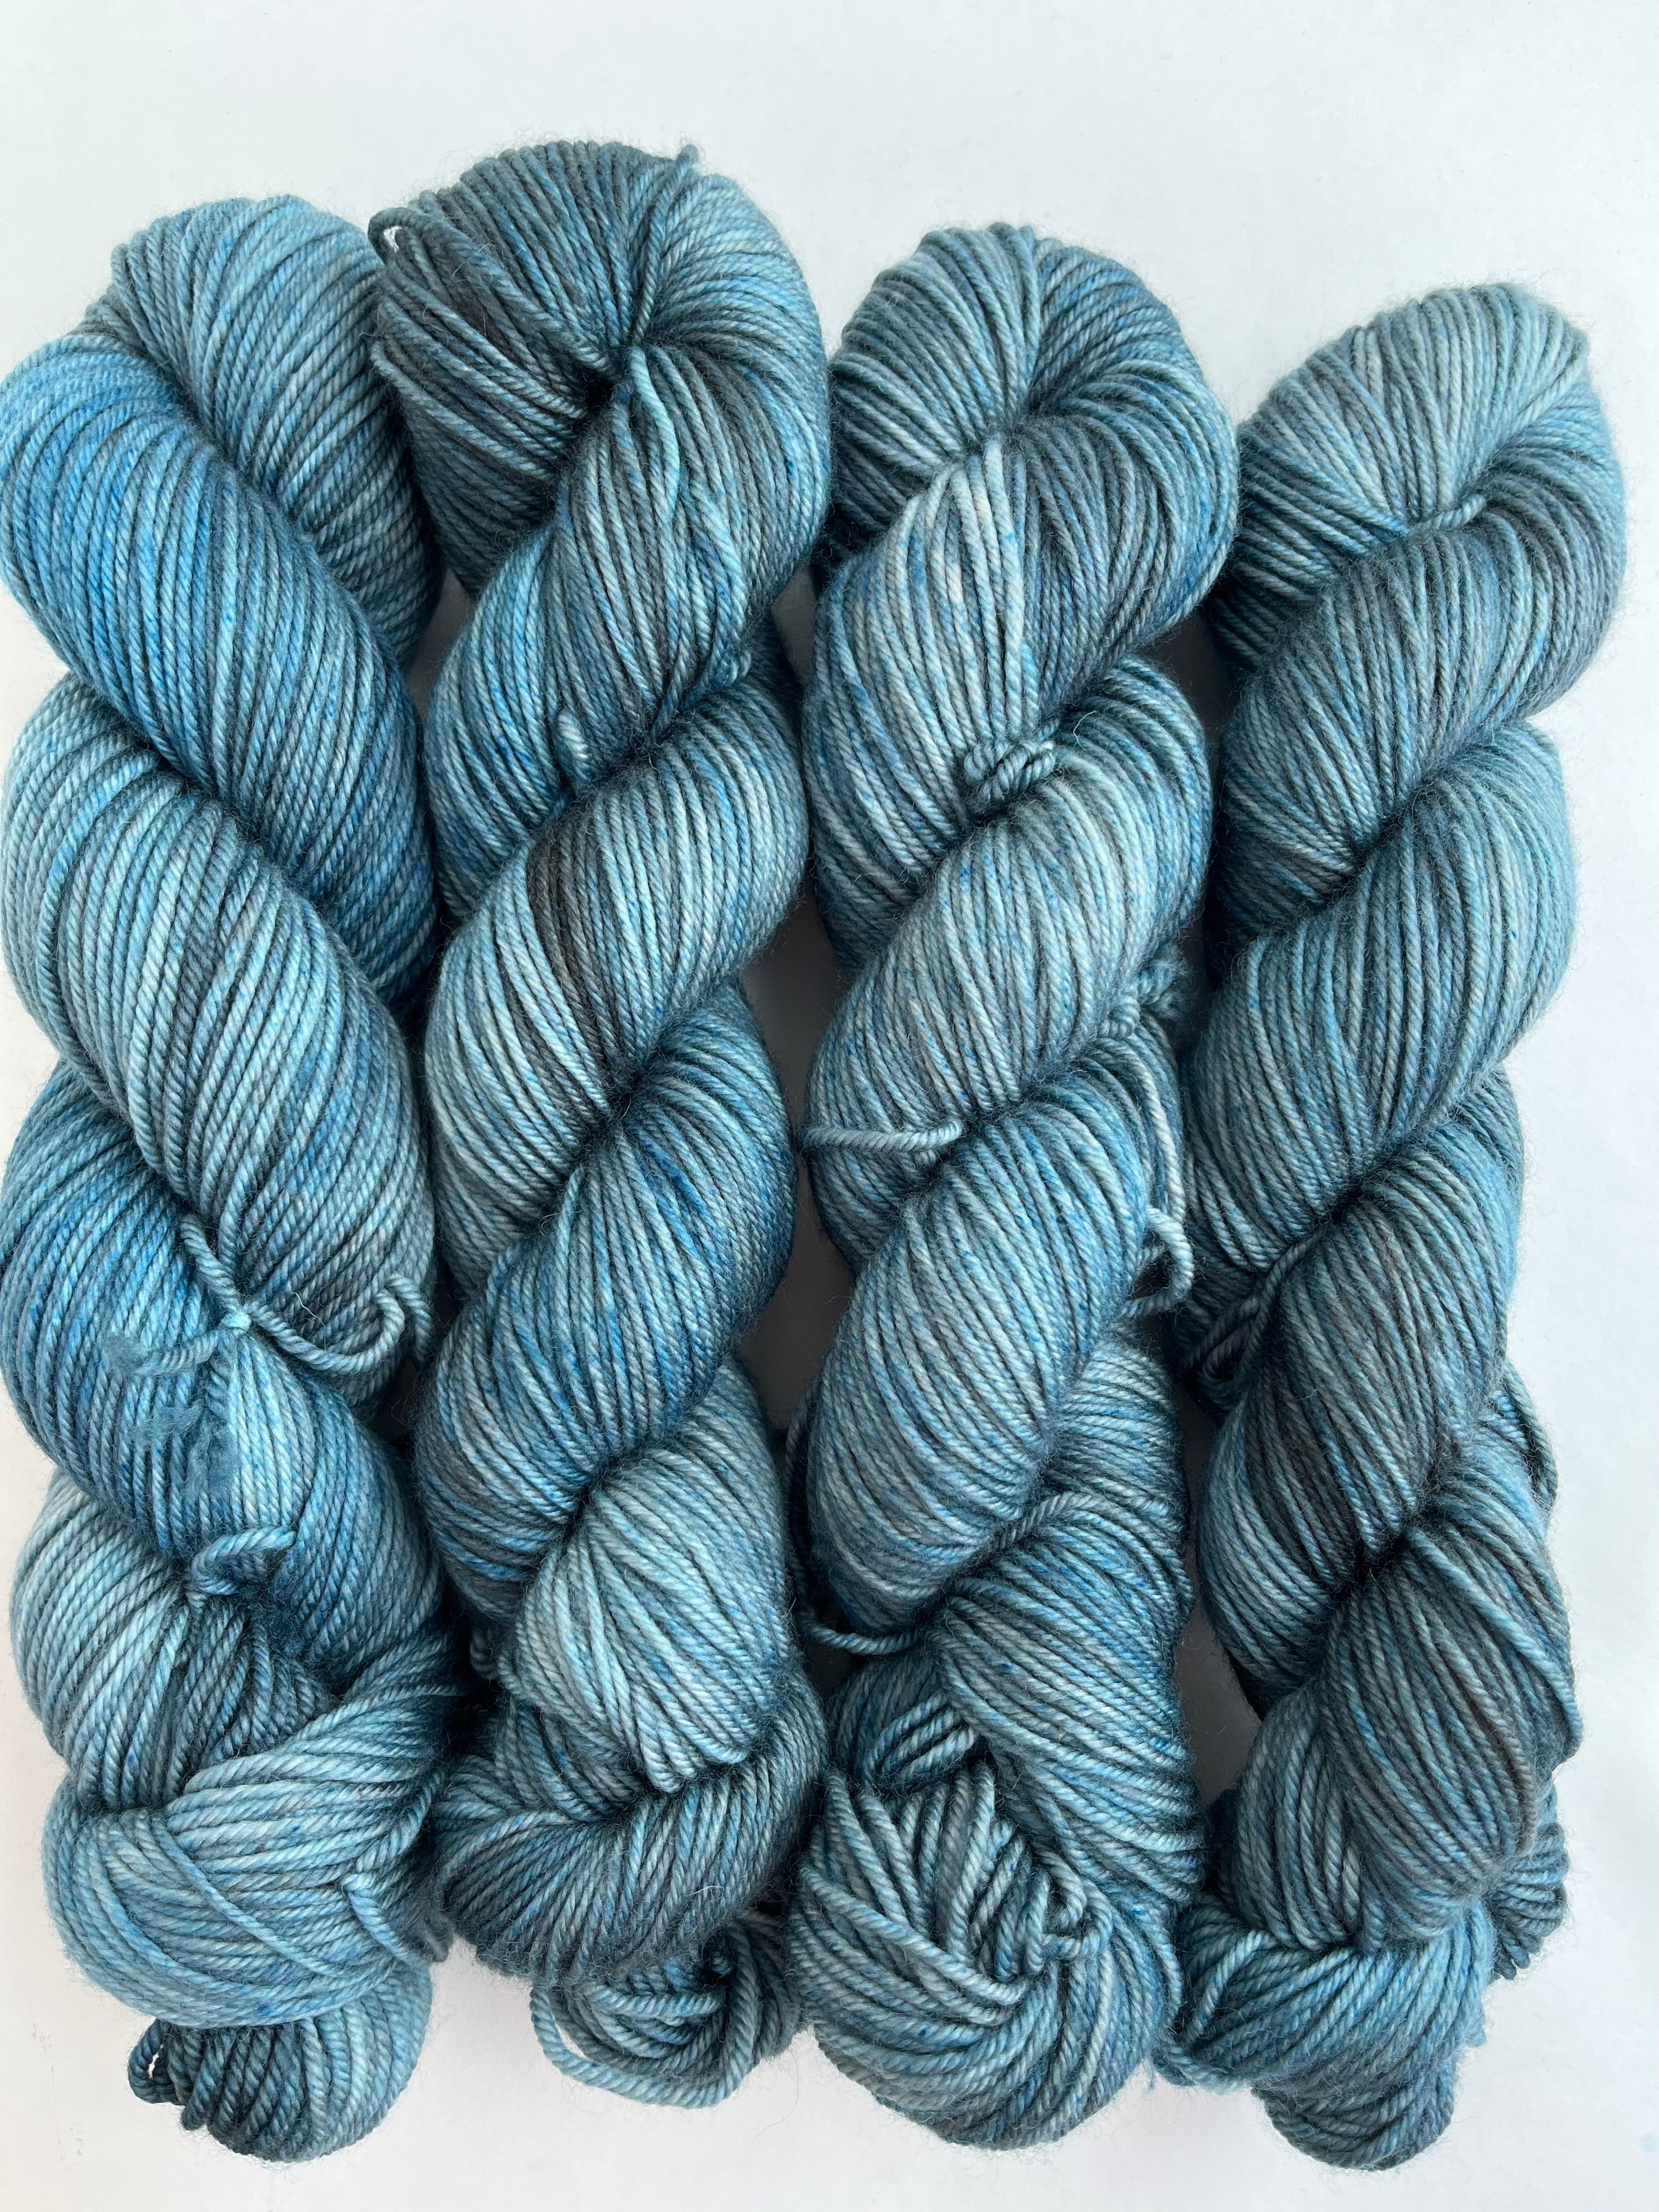 Tributary - Tidal DK from Tributary Yarns